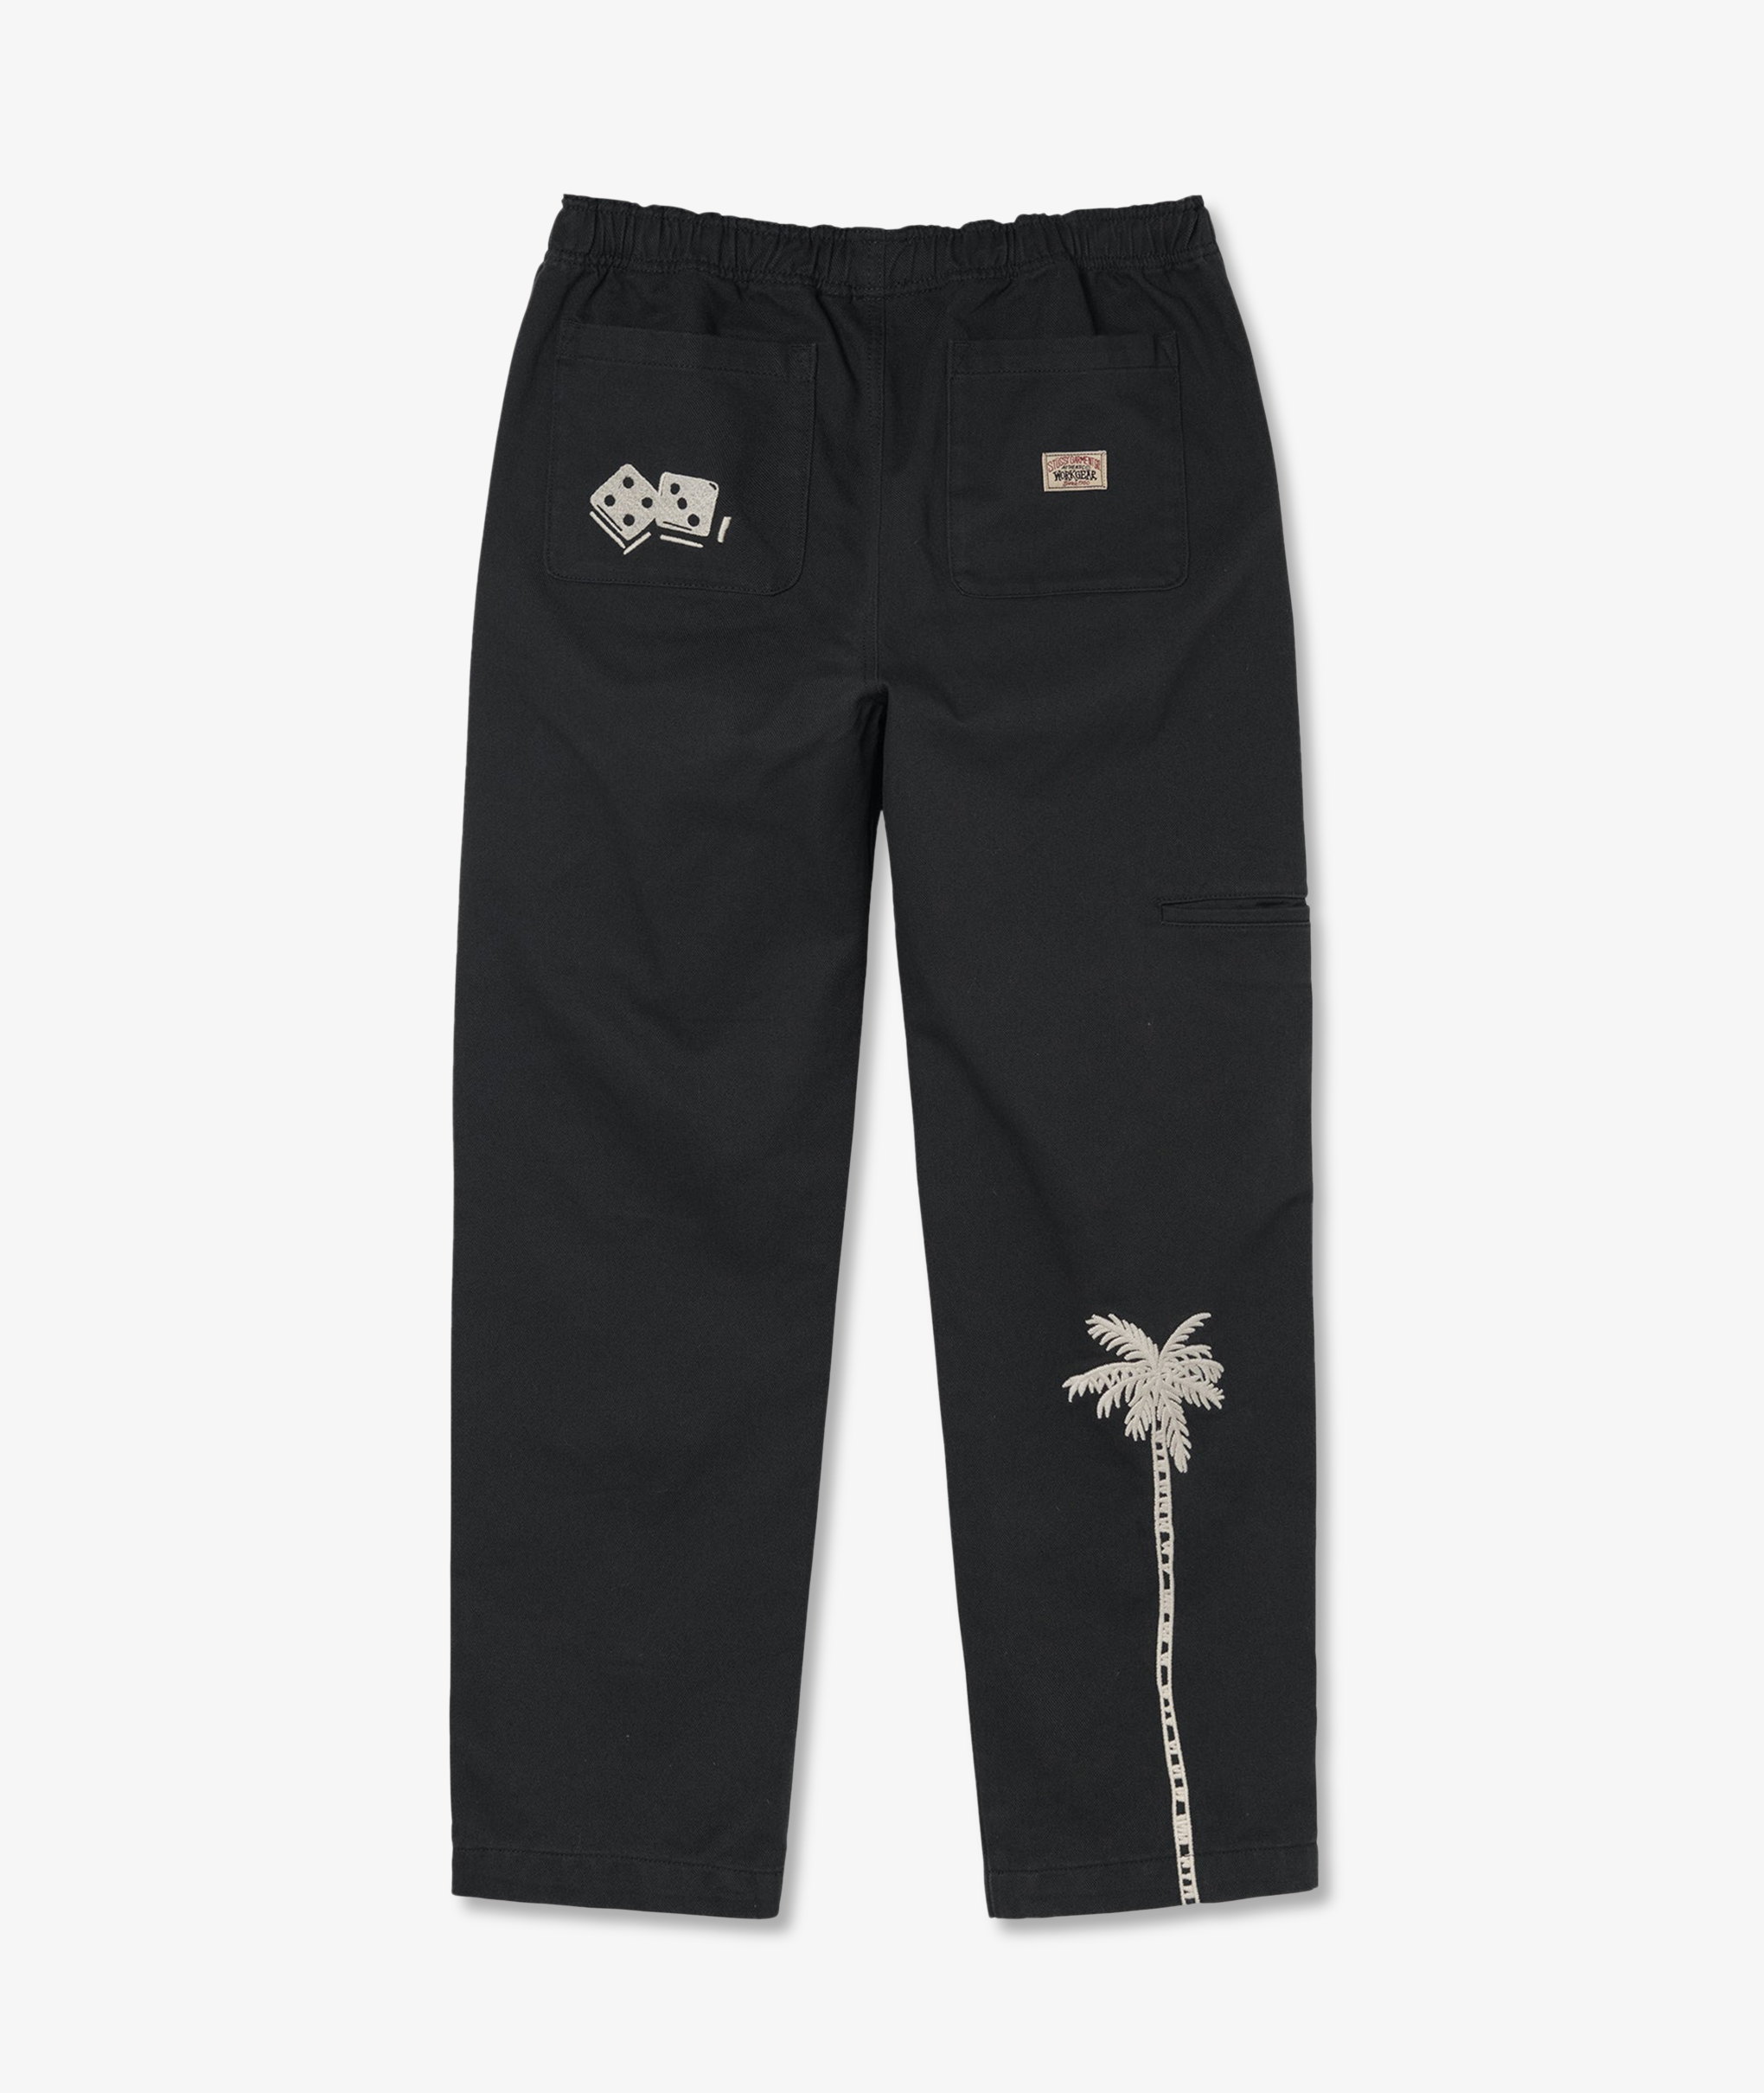 Norse Store | Shipping Worldwide - Stussy Noma Icon Beach Pant 